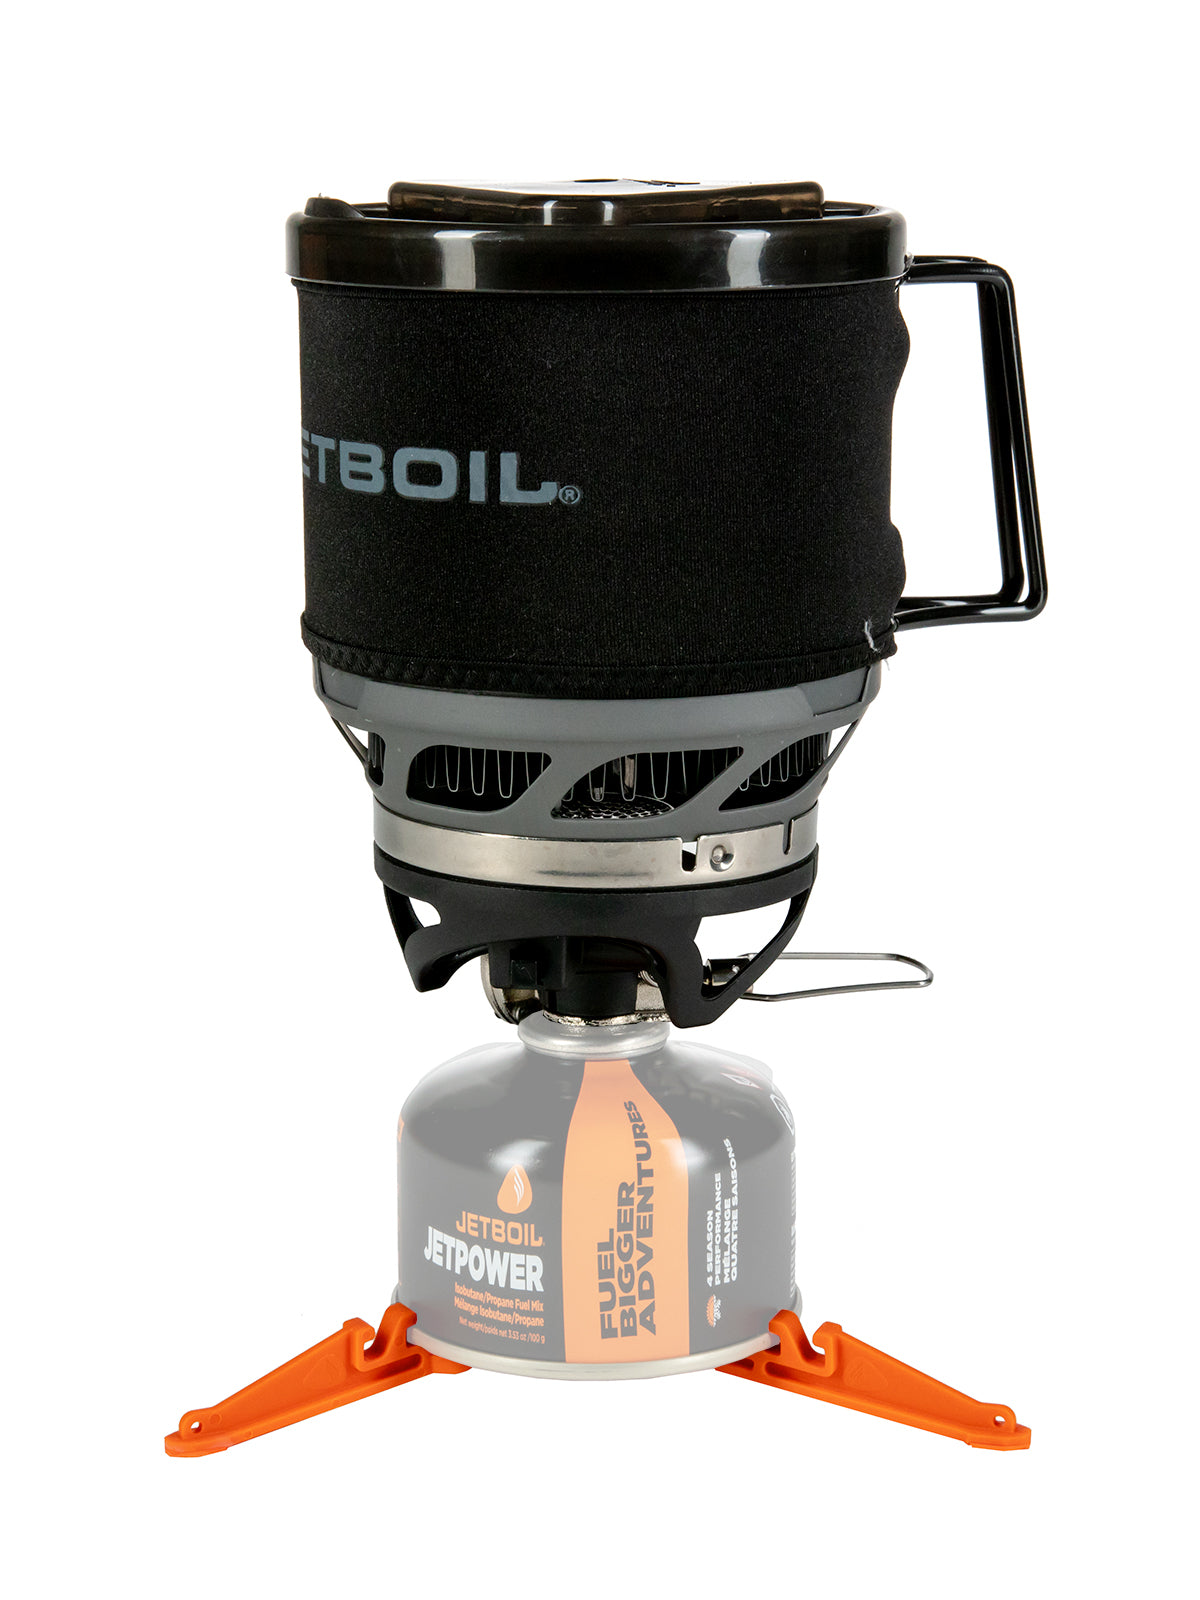 Jetboil MINIMO Cooking System